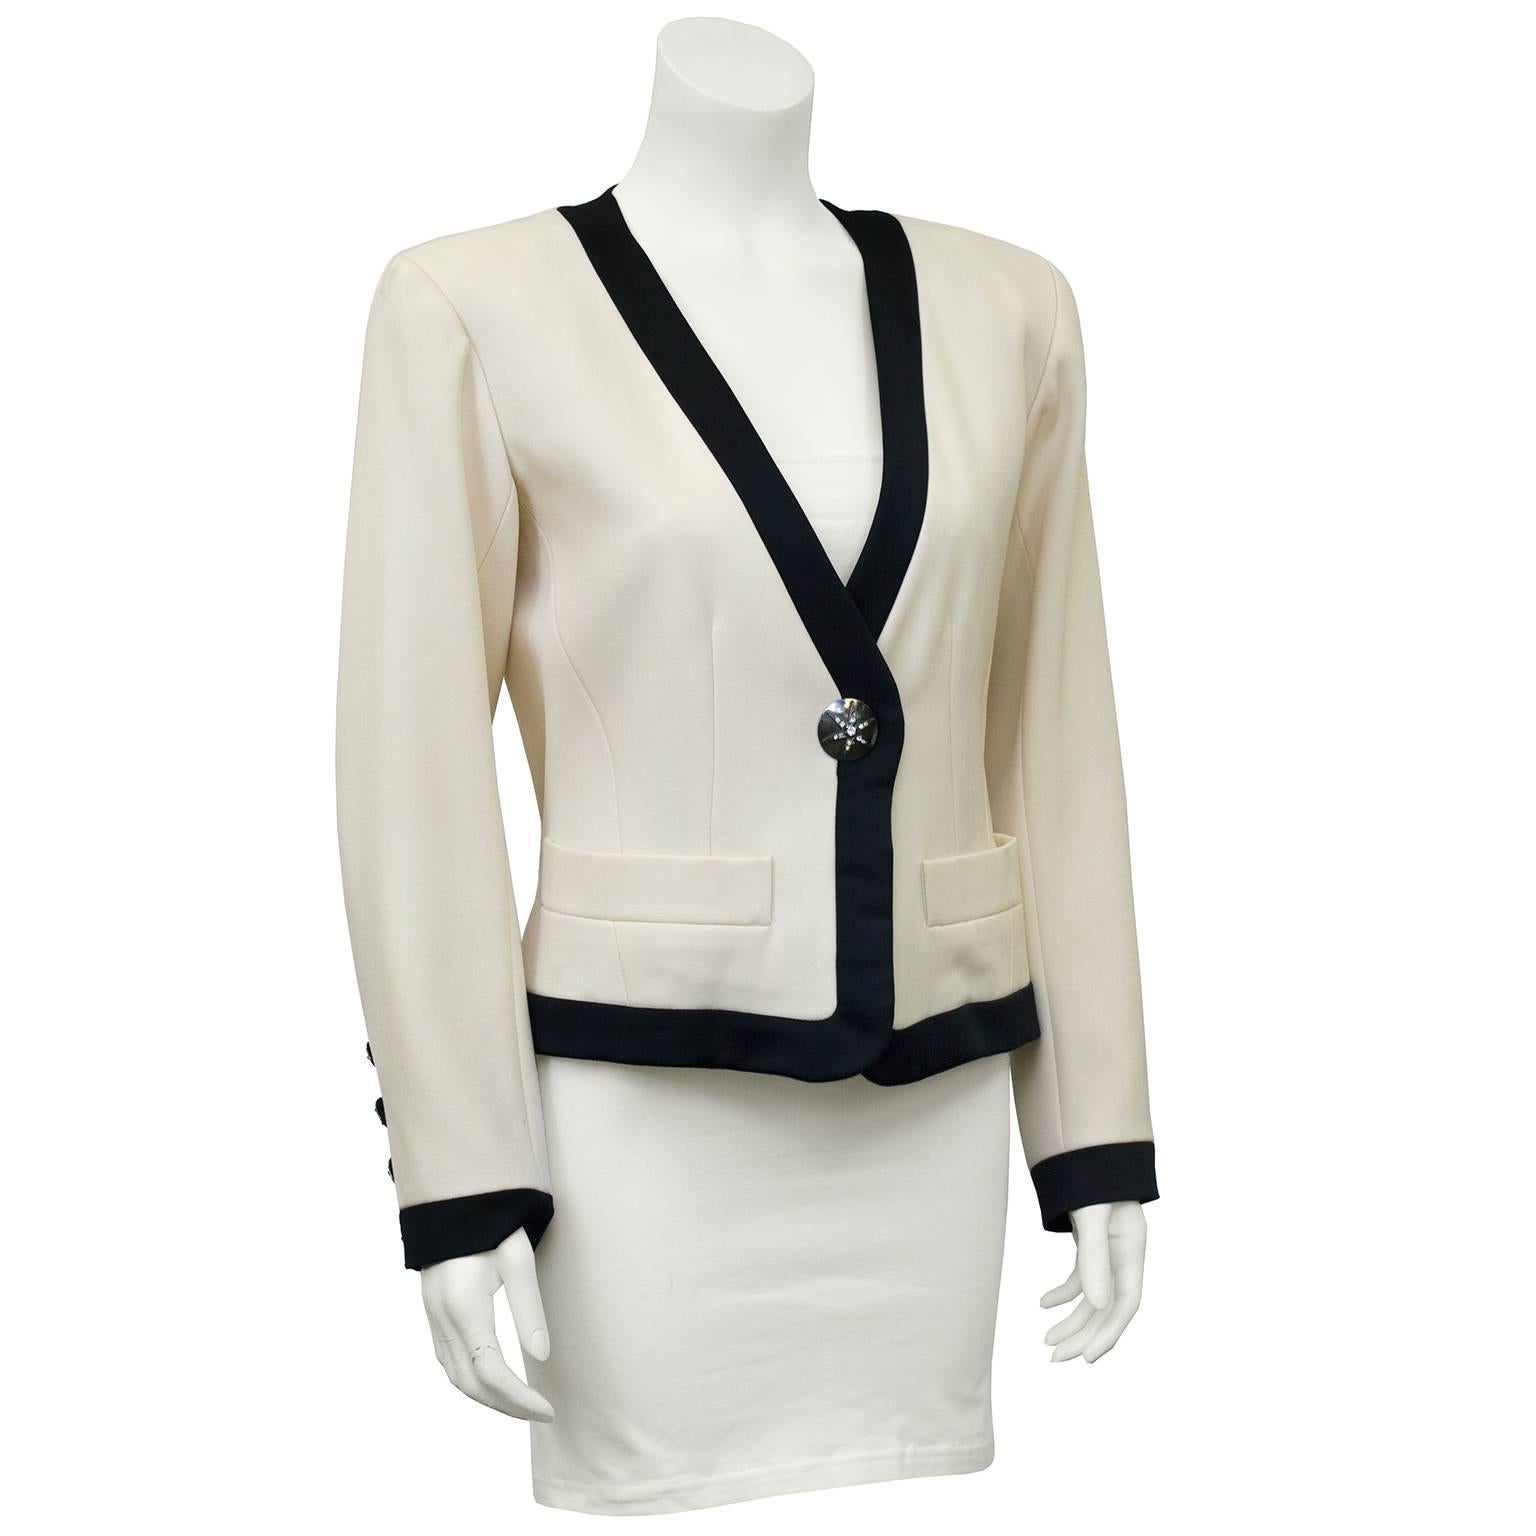 Great 1980's Yves Saint Laurent cropped cream wool gabardine jacket with thick black satin trim. One stunning large sliver button at center embellished with rhinestone star symbol. Five smaller matching buttons at wrists. Deep V front and larger